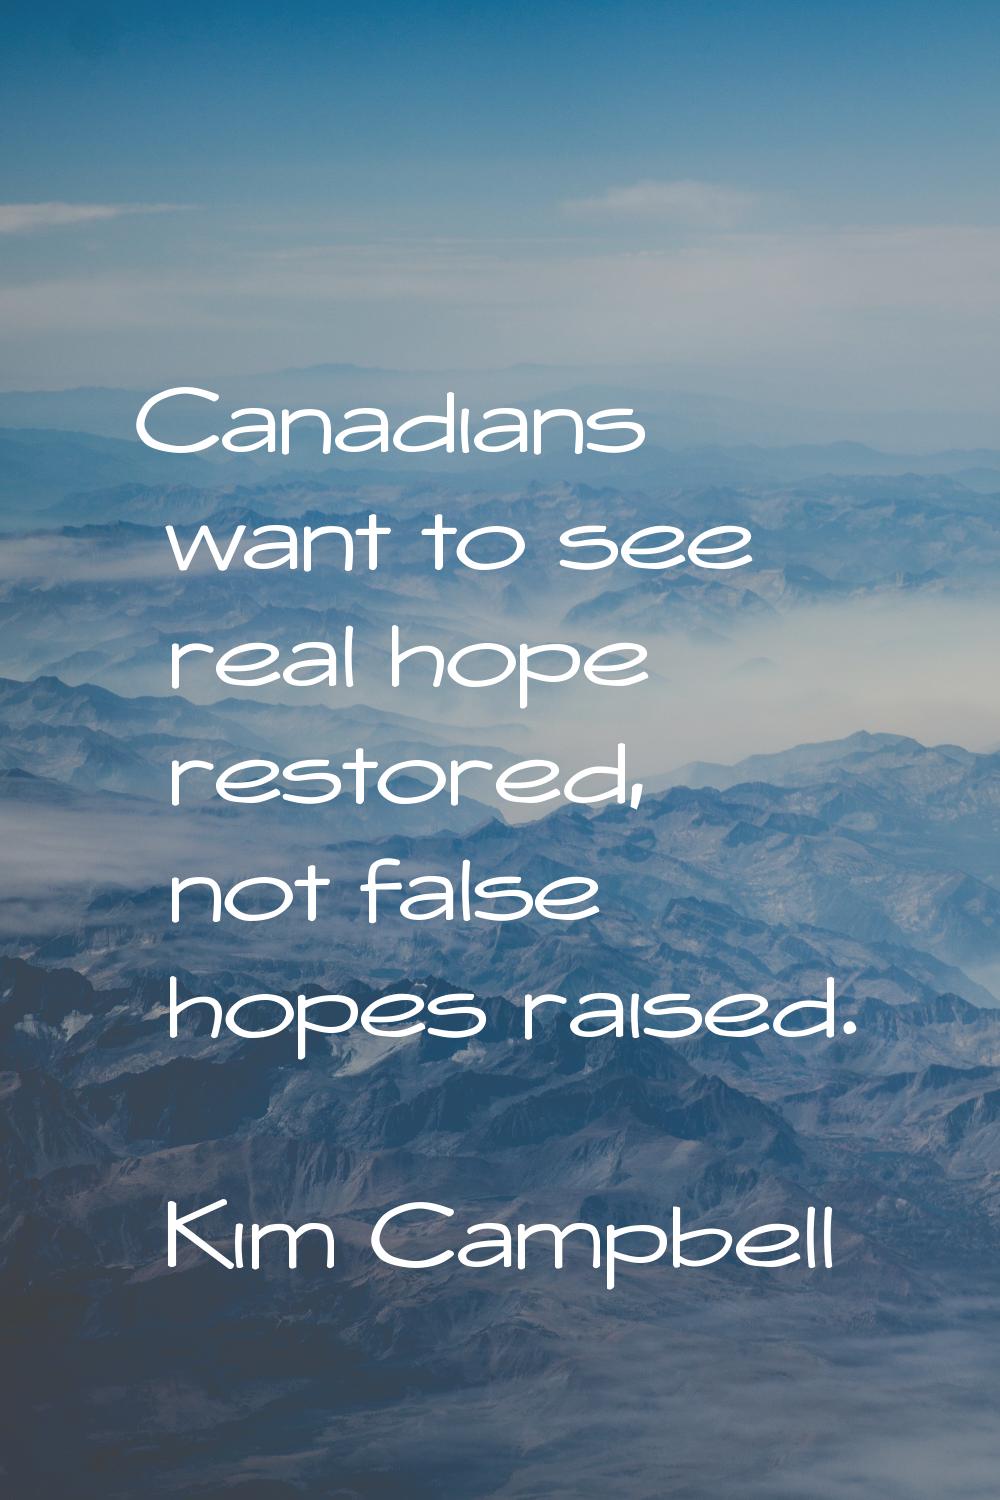 Canadians want to see real hope restored, not false hopes raised.